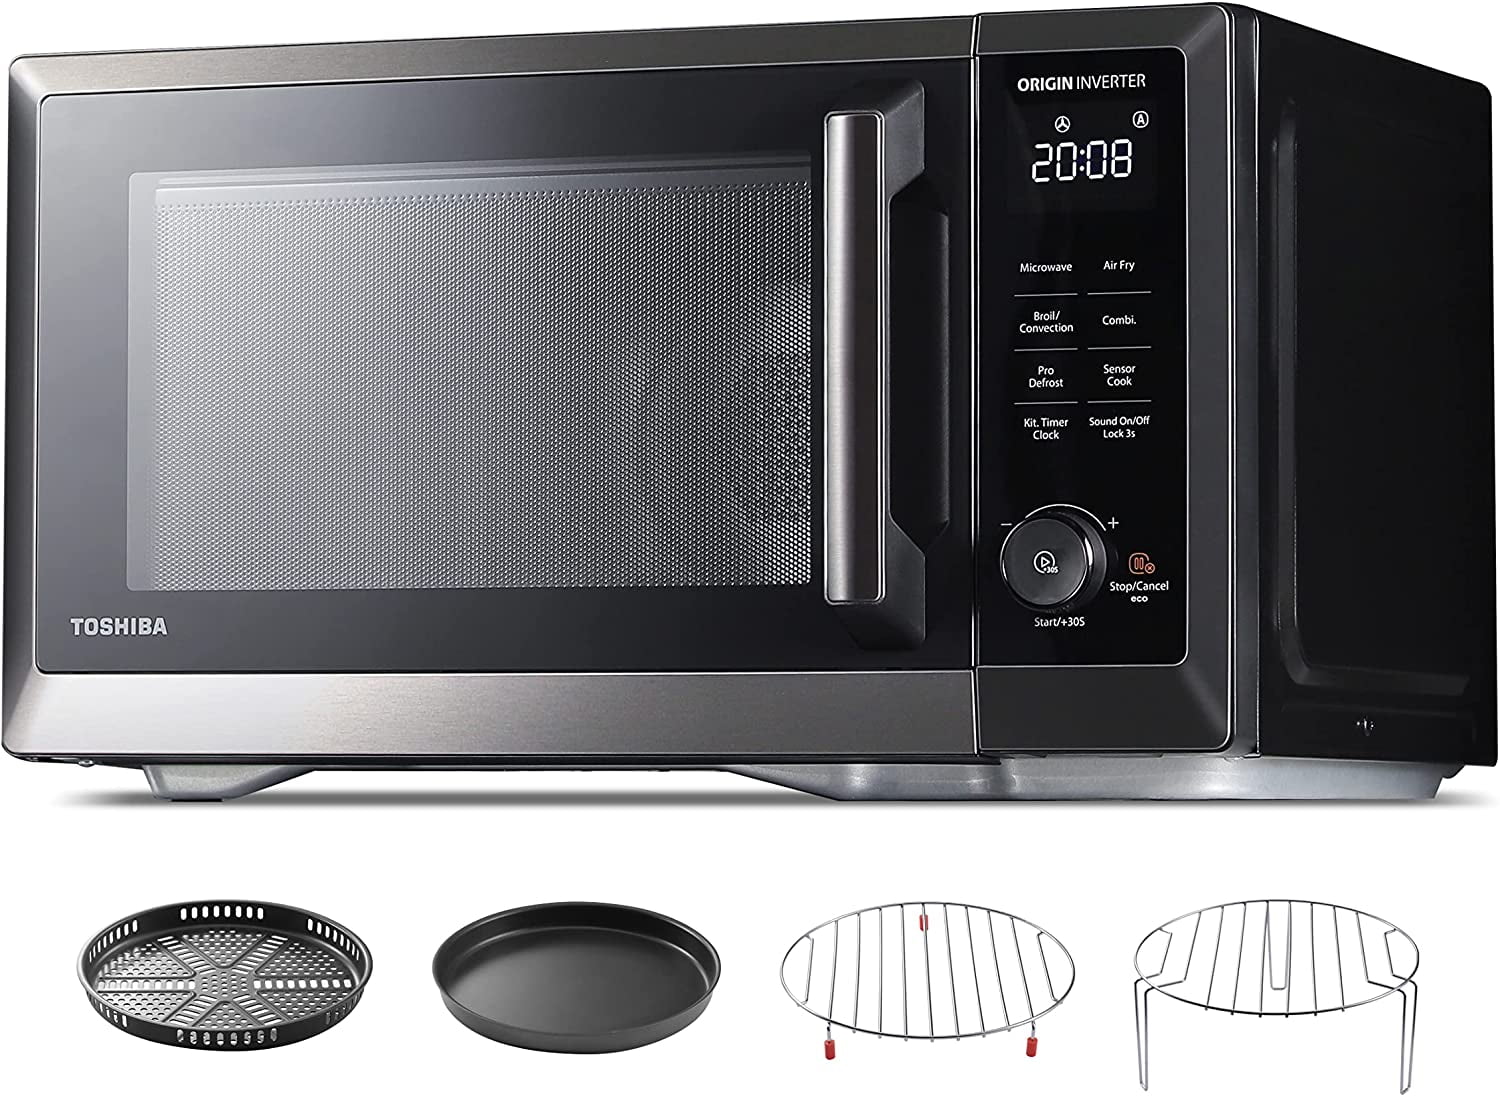 TOSHIBA 7-in-1 Countertop Microwave Oven Air Fryer Inverter, Convection, Broil, Speedy Even Defrost, Humidity Sensor, Mute Function, 27 Auto Menu&47 Recipes, 1.0 cu.ft/30QT, 1000W - Walmart.com